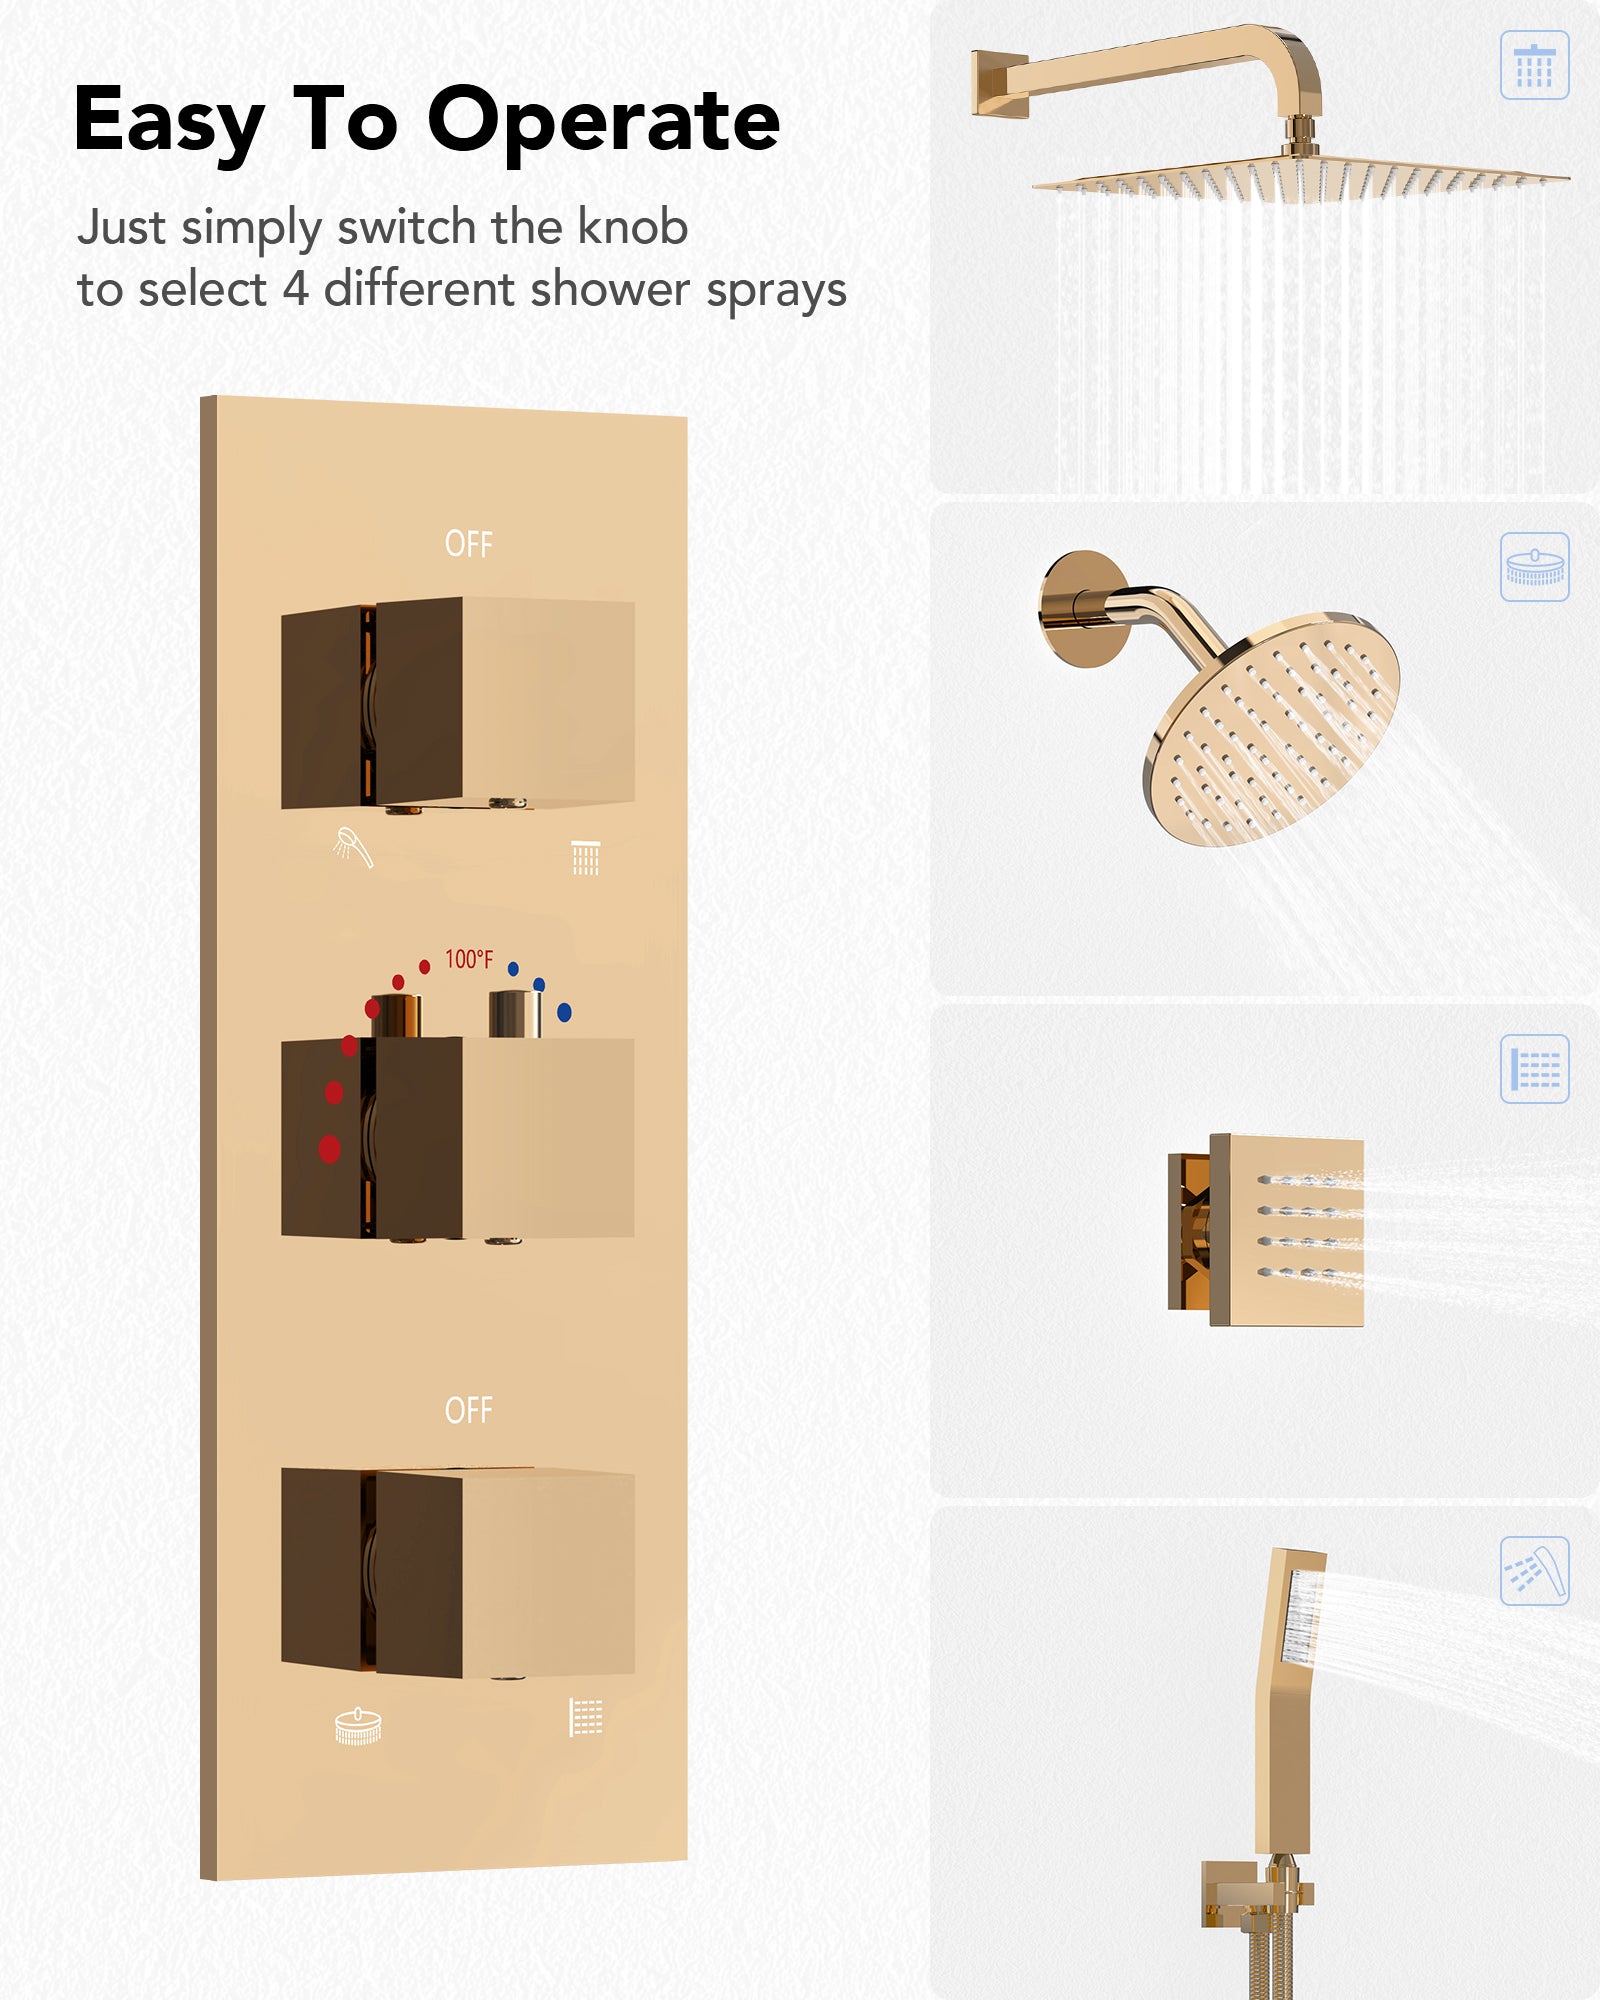 Versatile four-way showering experience with ceiling-mounted, shower head, wall-fixed shower head, side massage jets, and handheld sprayer_jpg